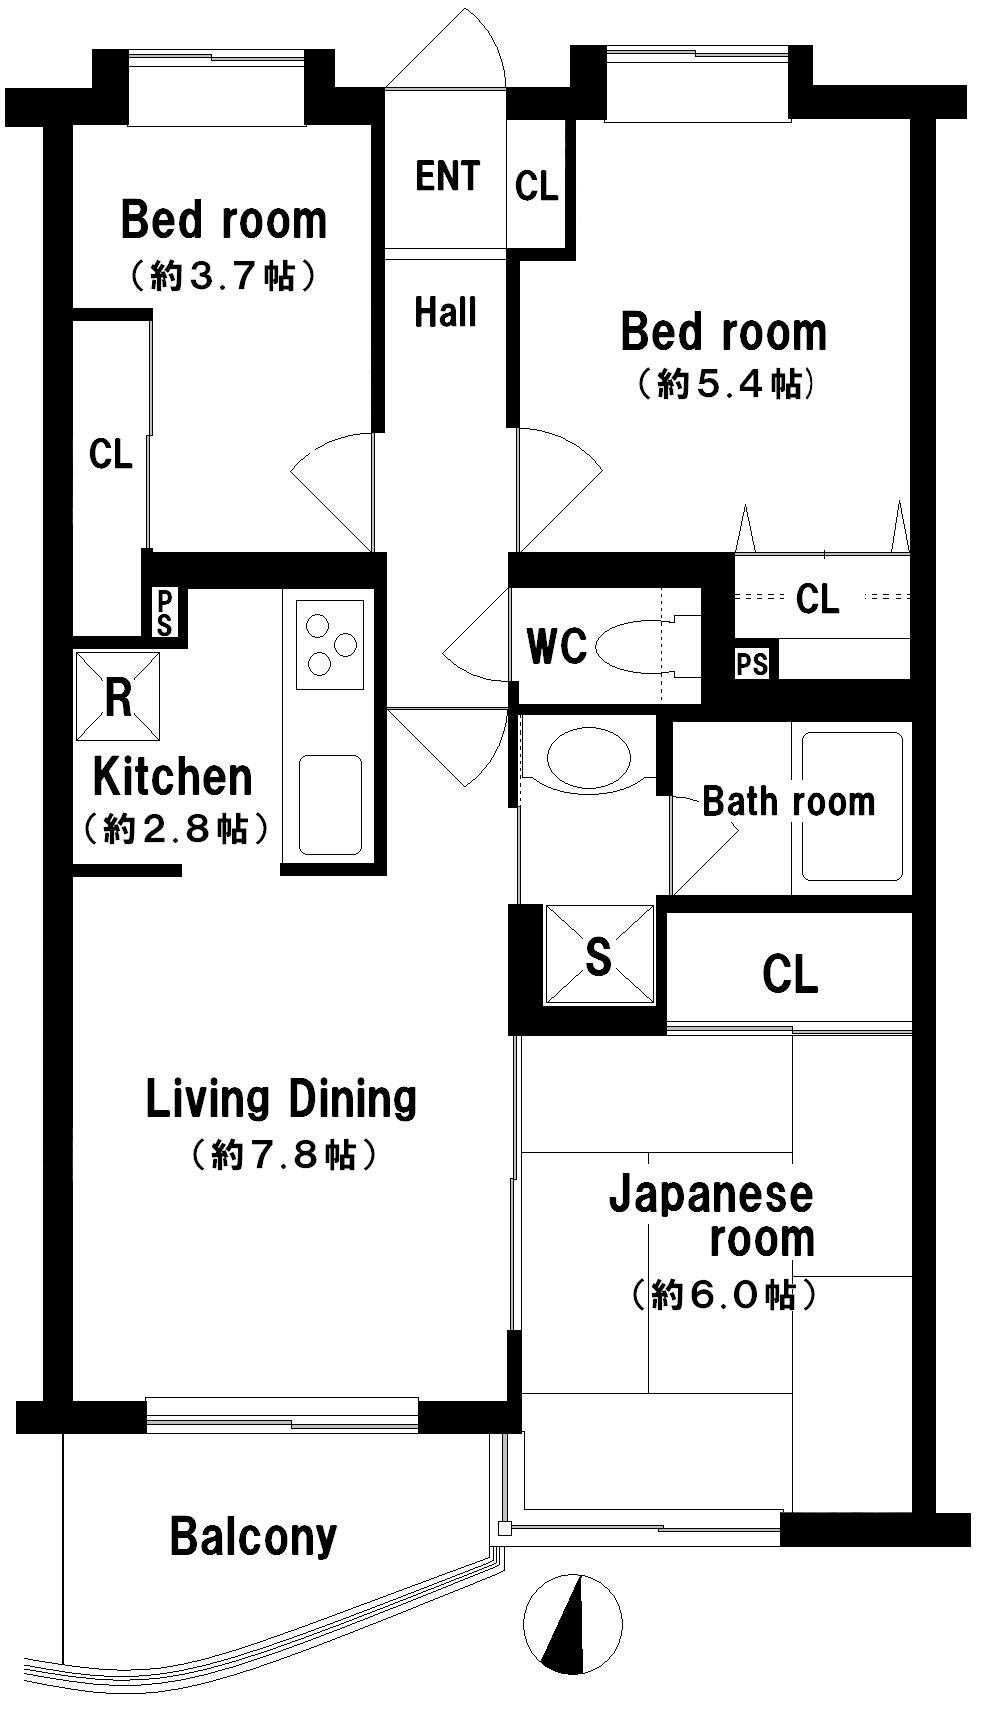 Floor plan. 3LDK, Price 37,800,000 yen, Footprint 57.1 sq m , There is housed in the balcony area 3.9 sq m each room